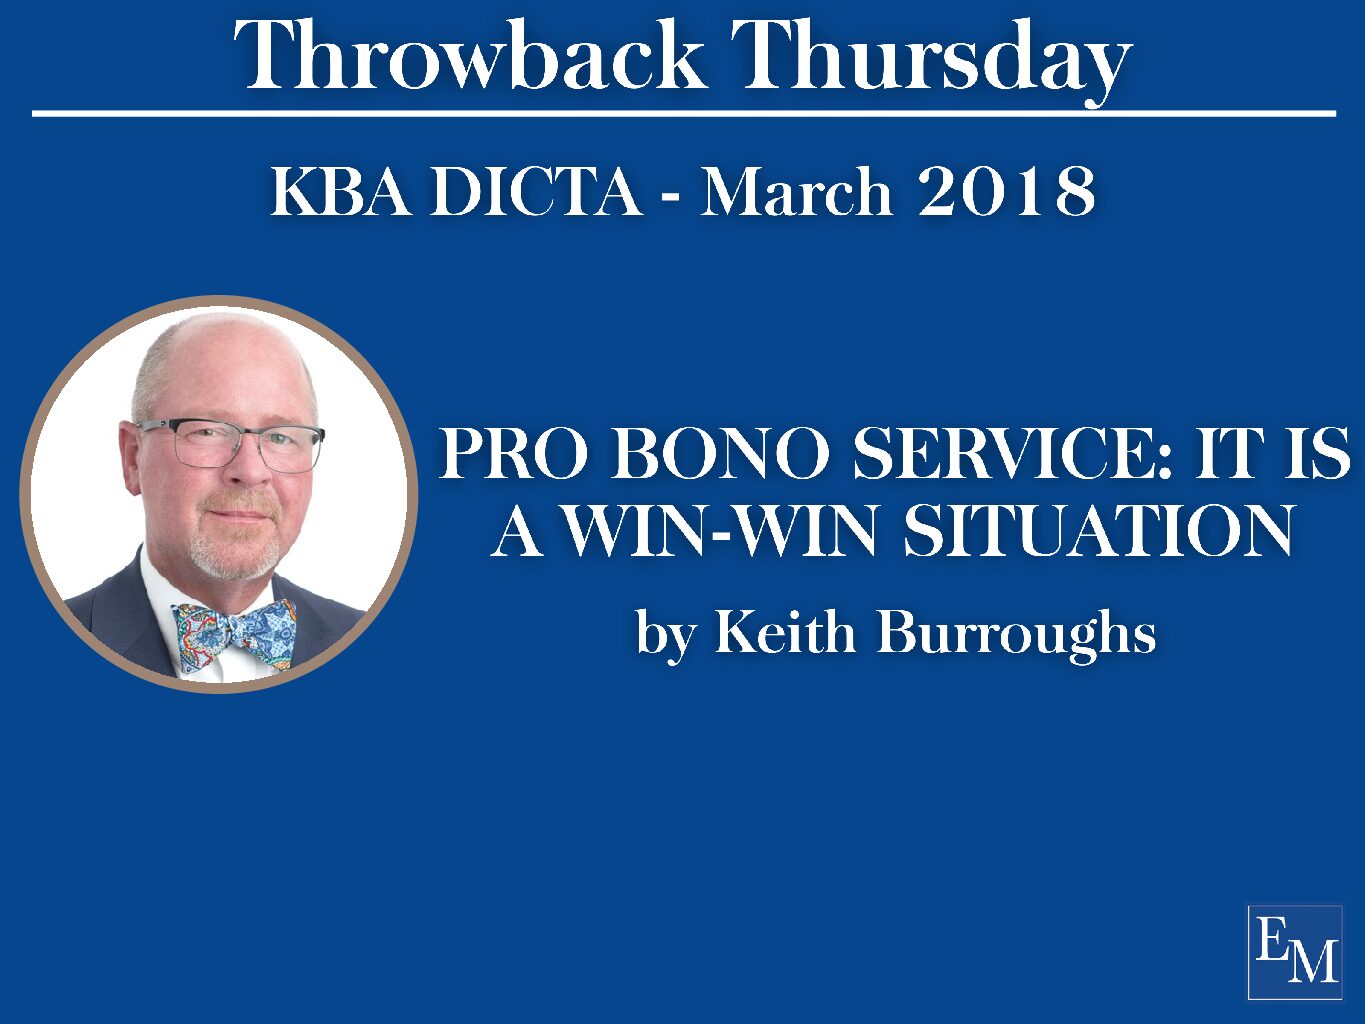 Throwback Thursday: PRO BONO SERVICE: IT IS A WIN-WIN SITUATION by Keith Burroughs